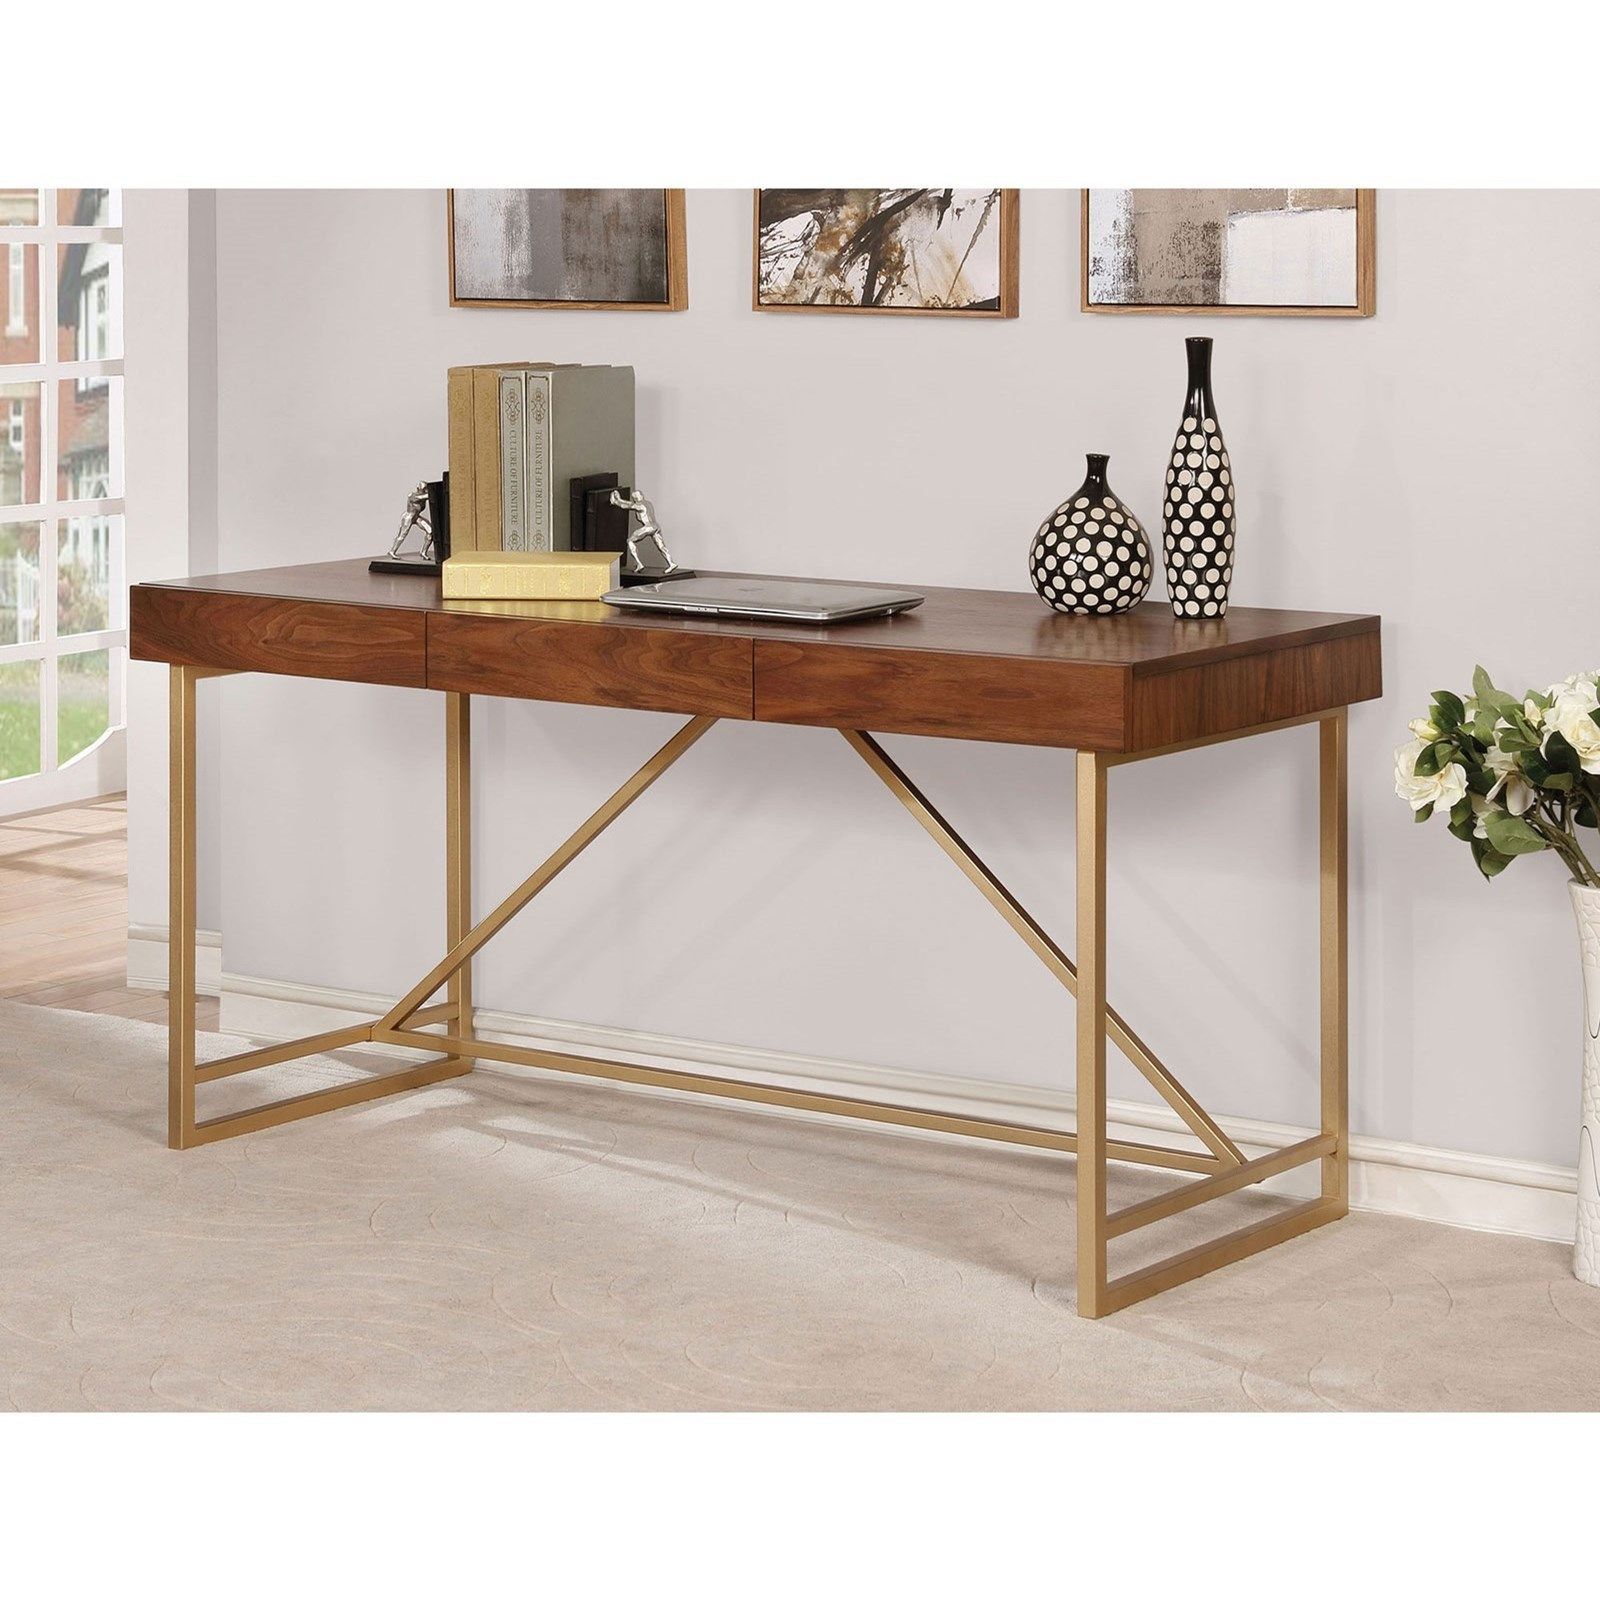 Furniture Of America – Foa Halstein Cm Dk6447 Contemporary Desk With In Gold And Olive Writing Desks (View 1 of 15)